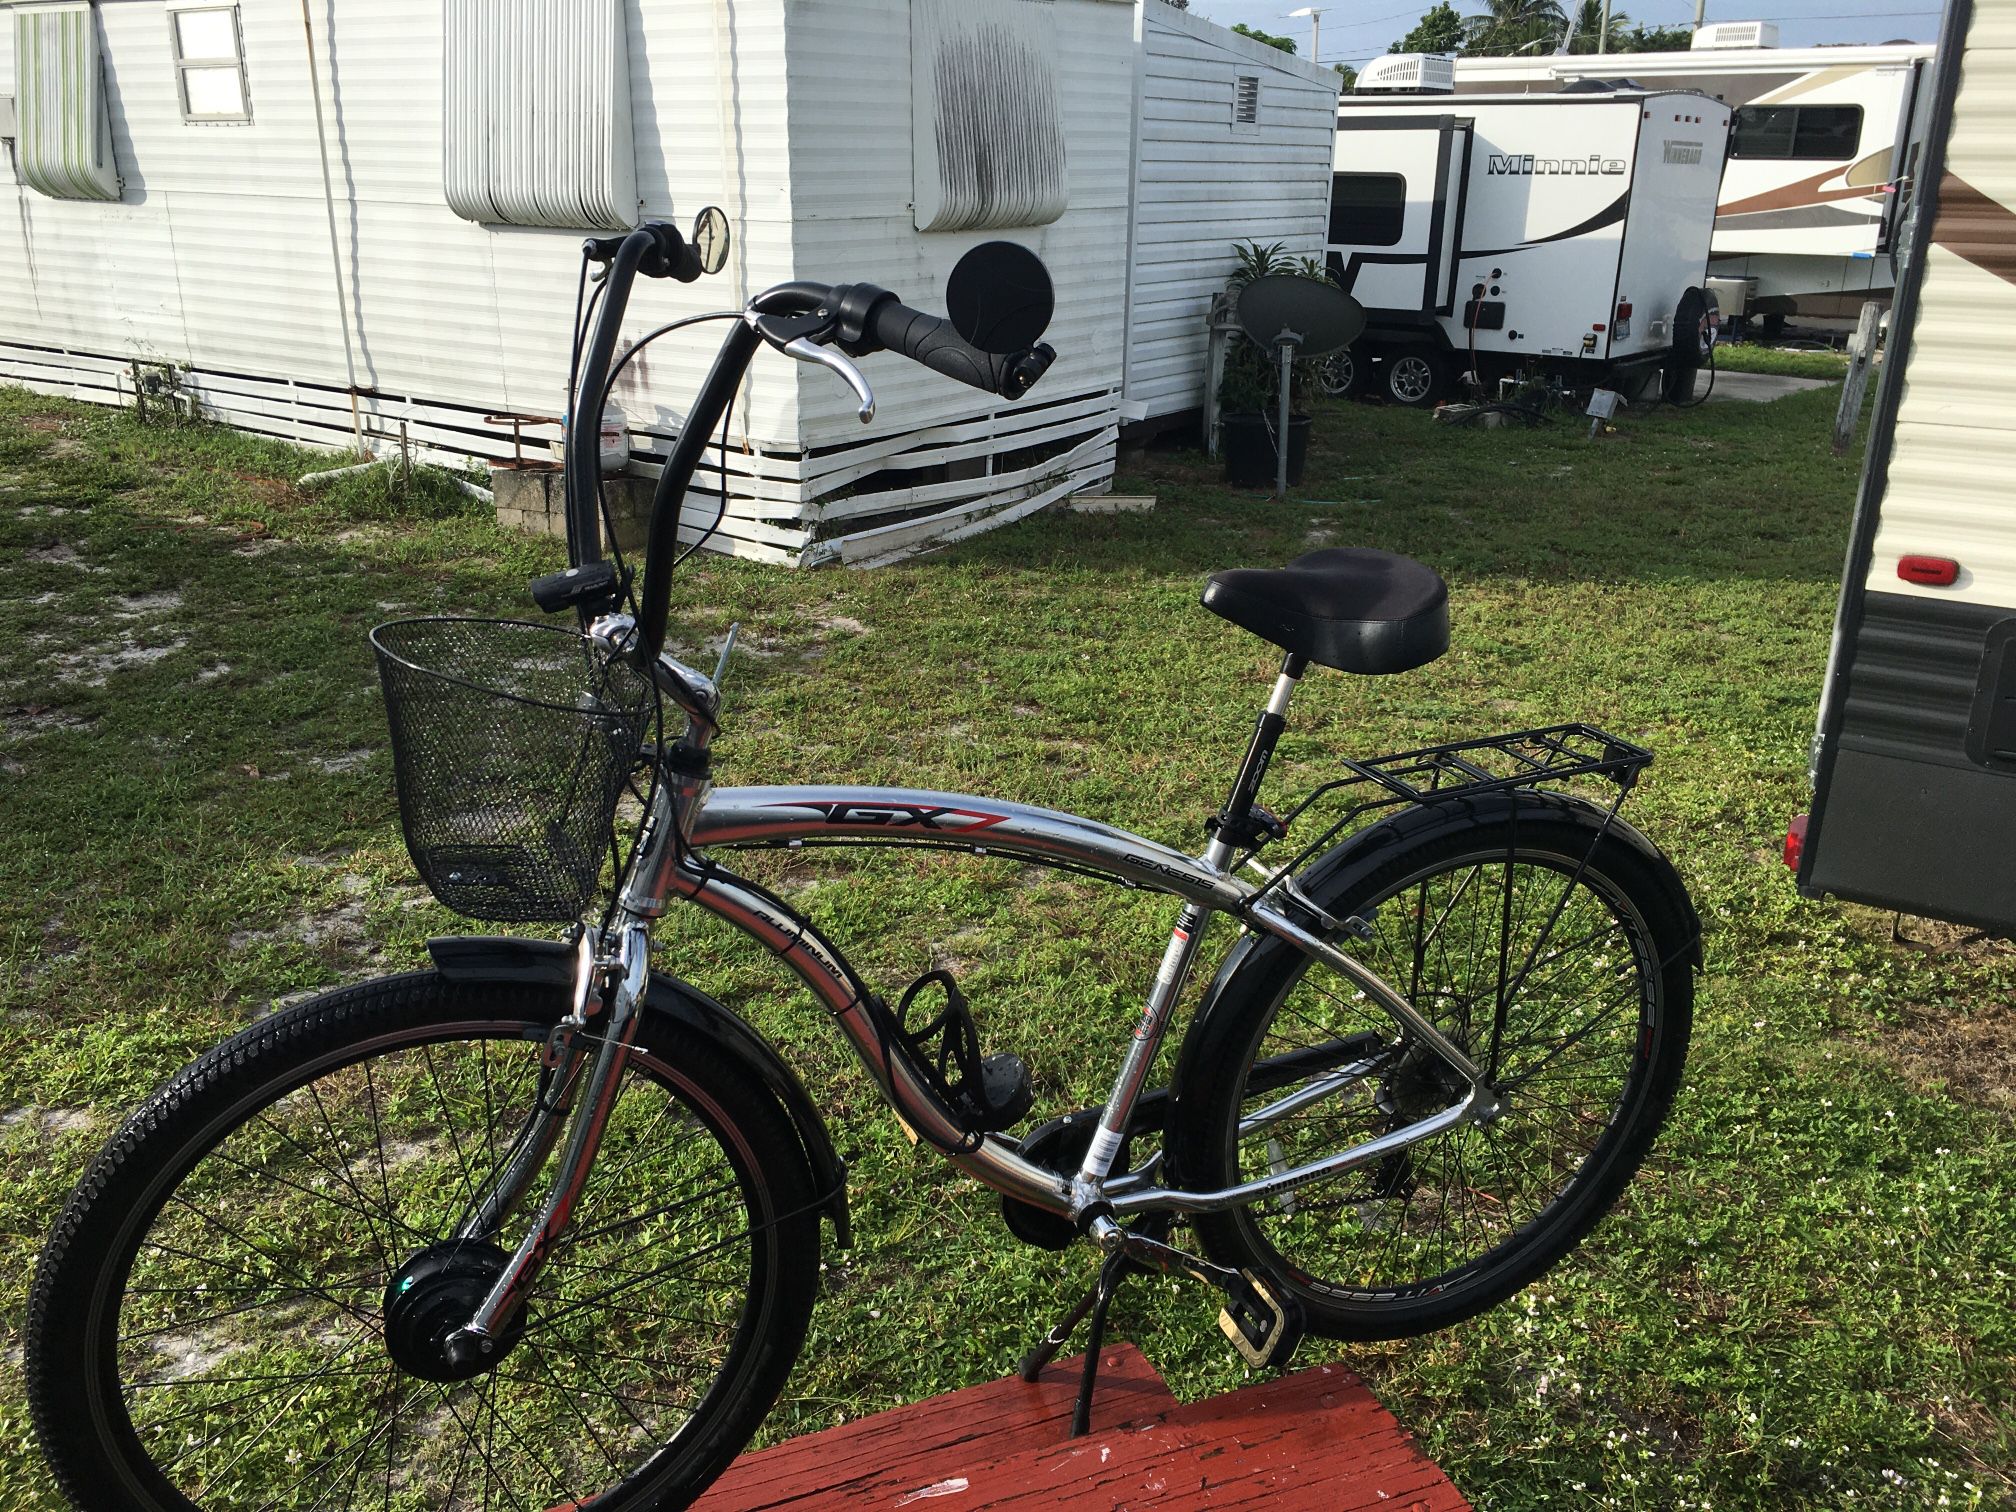 2 eBikes 29” Beach Cruiser Front Wh eel Drive And Lectric XP 2.0  $$ Is For both; See Discr. For Each